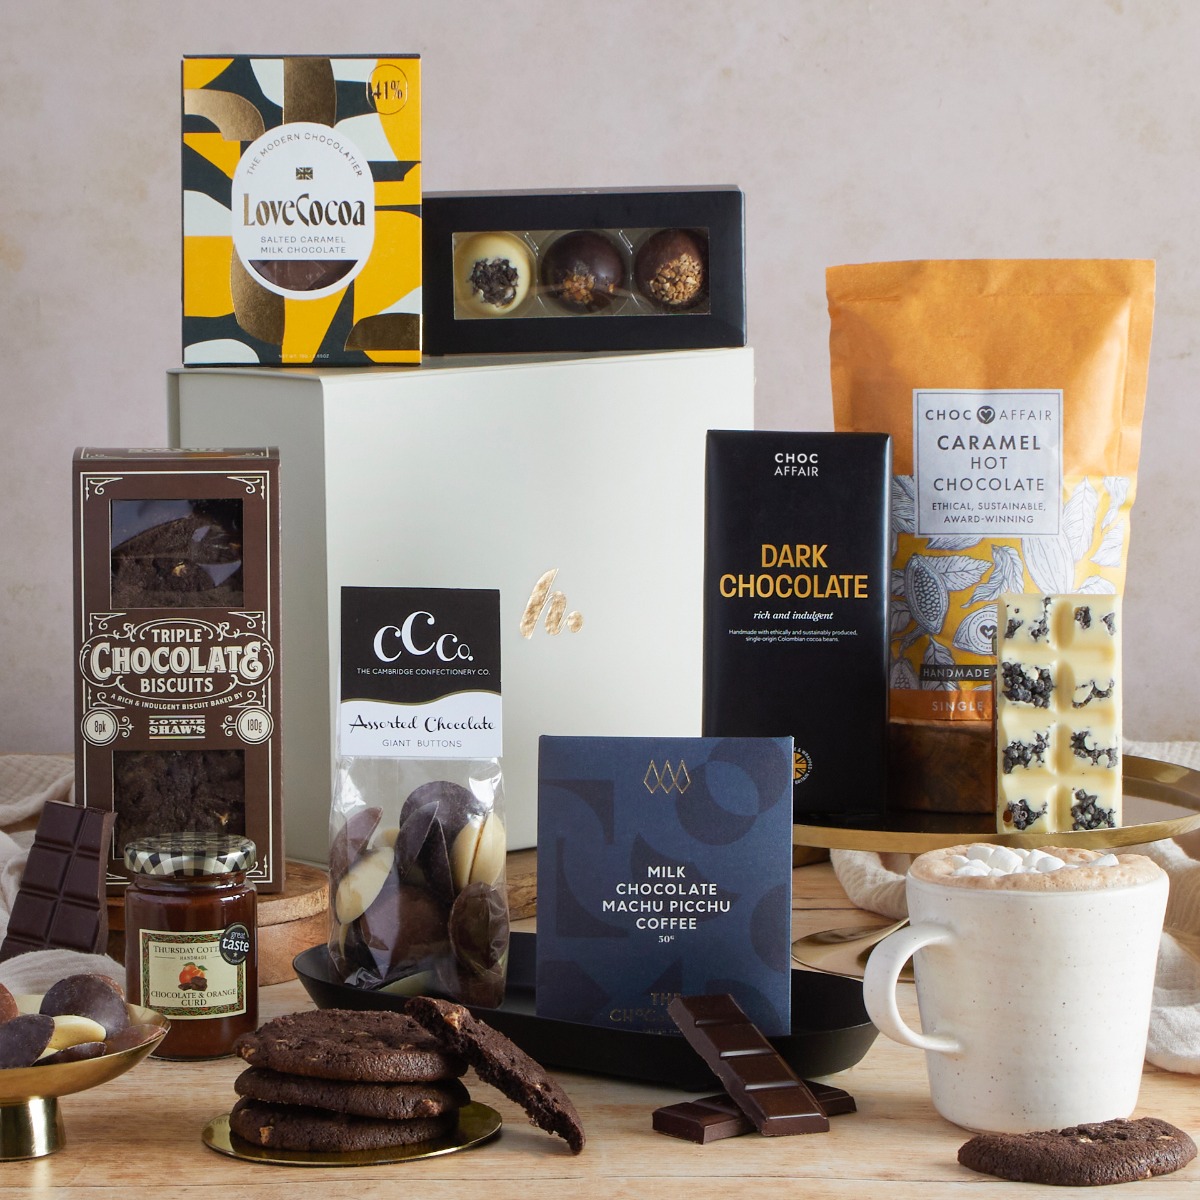 The Chocolate Indulgence Hamper with contents on display as the perfect Easter gift